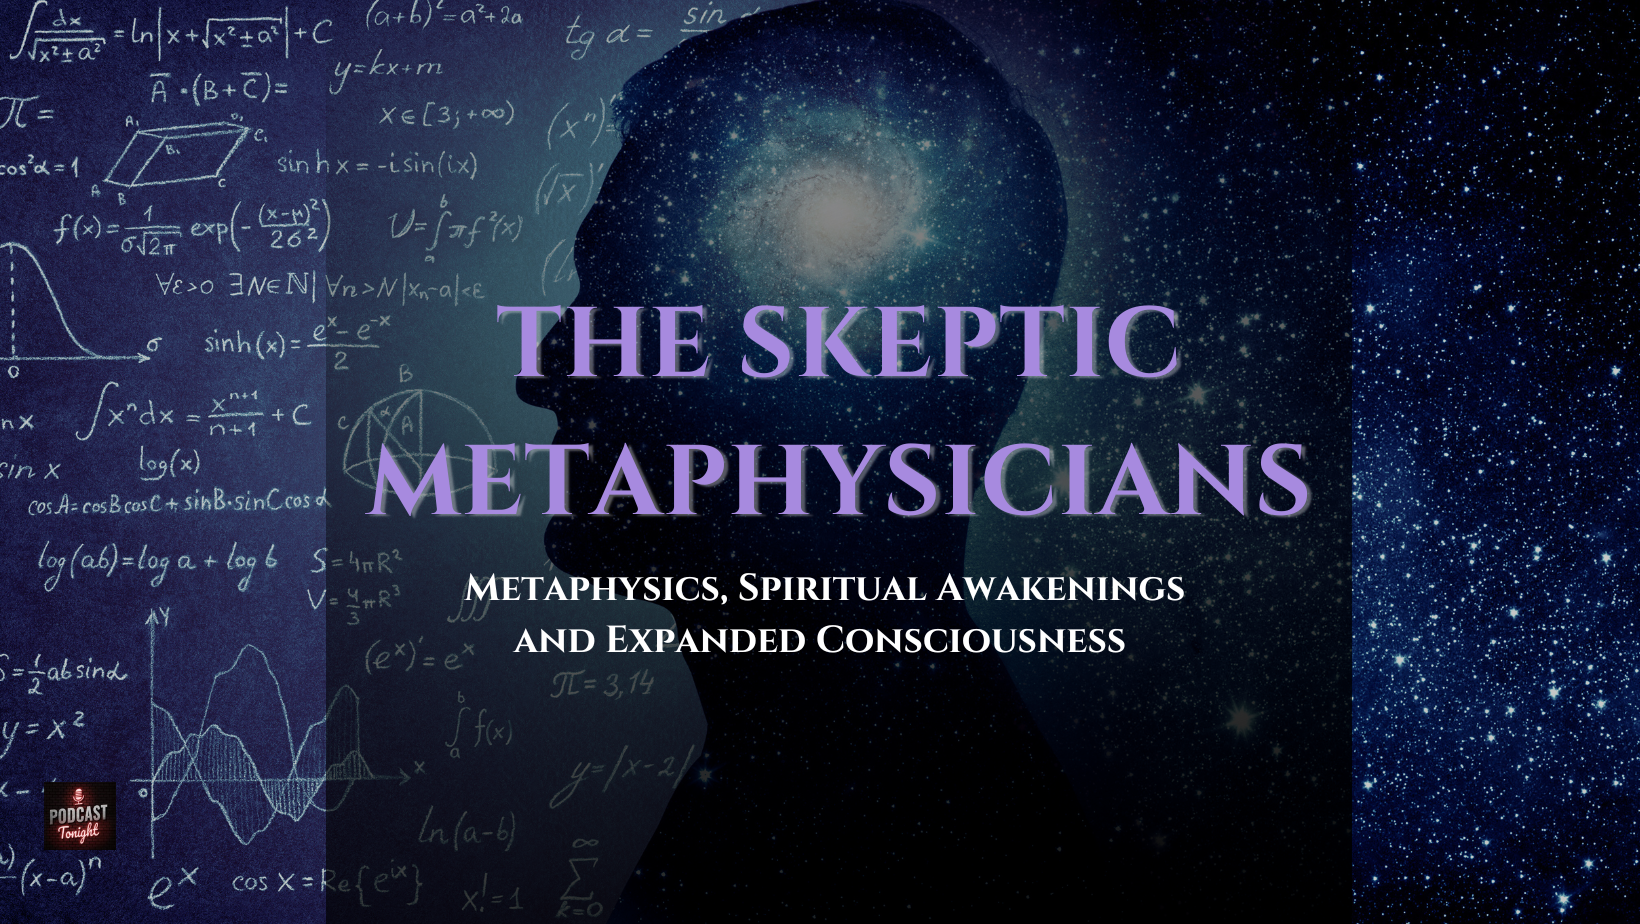 Listen to The Skeptic Metaphysicians - Metaphysics, Spiritual Awakenings  and Expanded Consciousness podcast